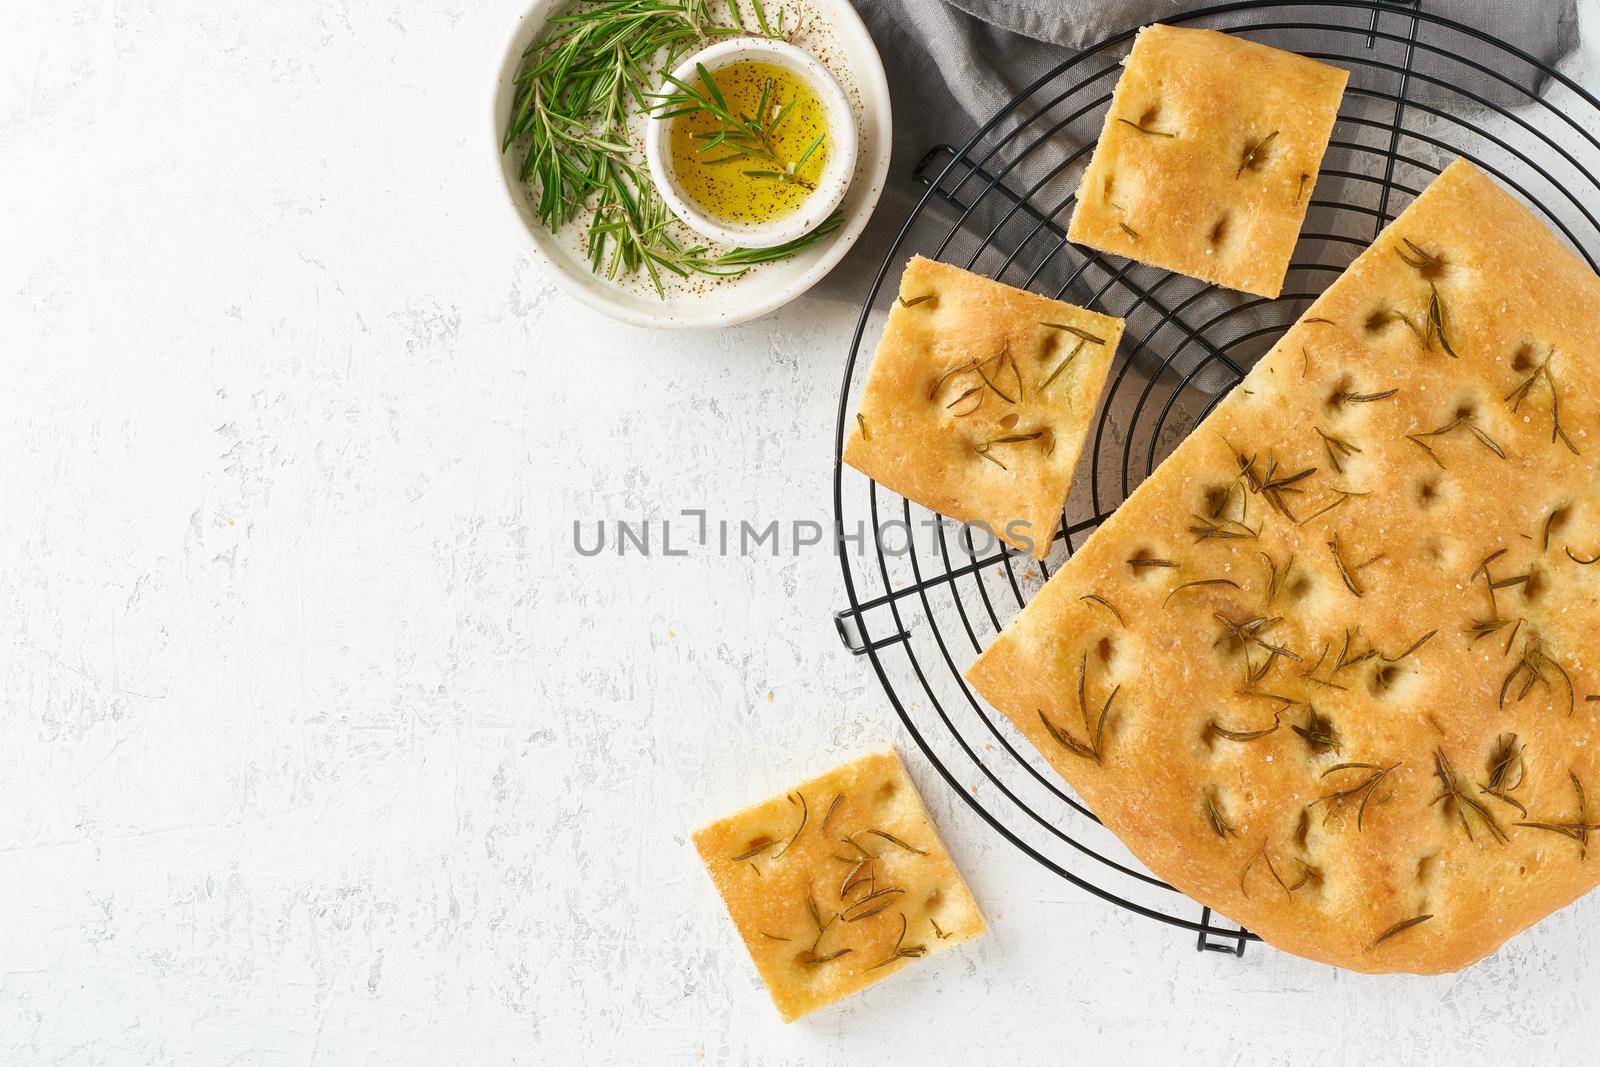 Focaccia, pizza, italian flat bread with rosemary and olive oil on grid on white rustic table, tradition italian cuisine, top view, copy space